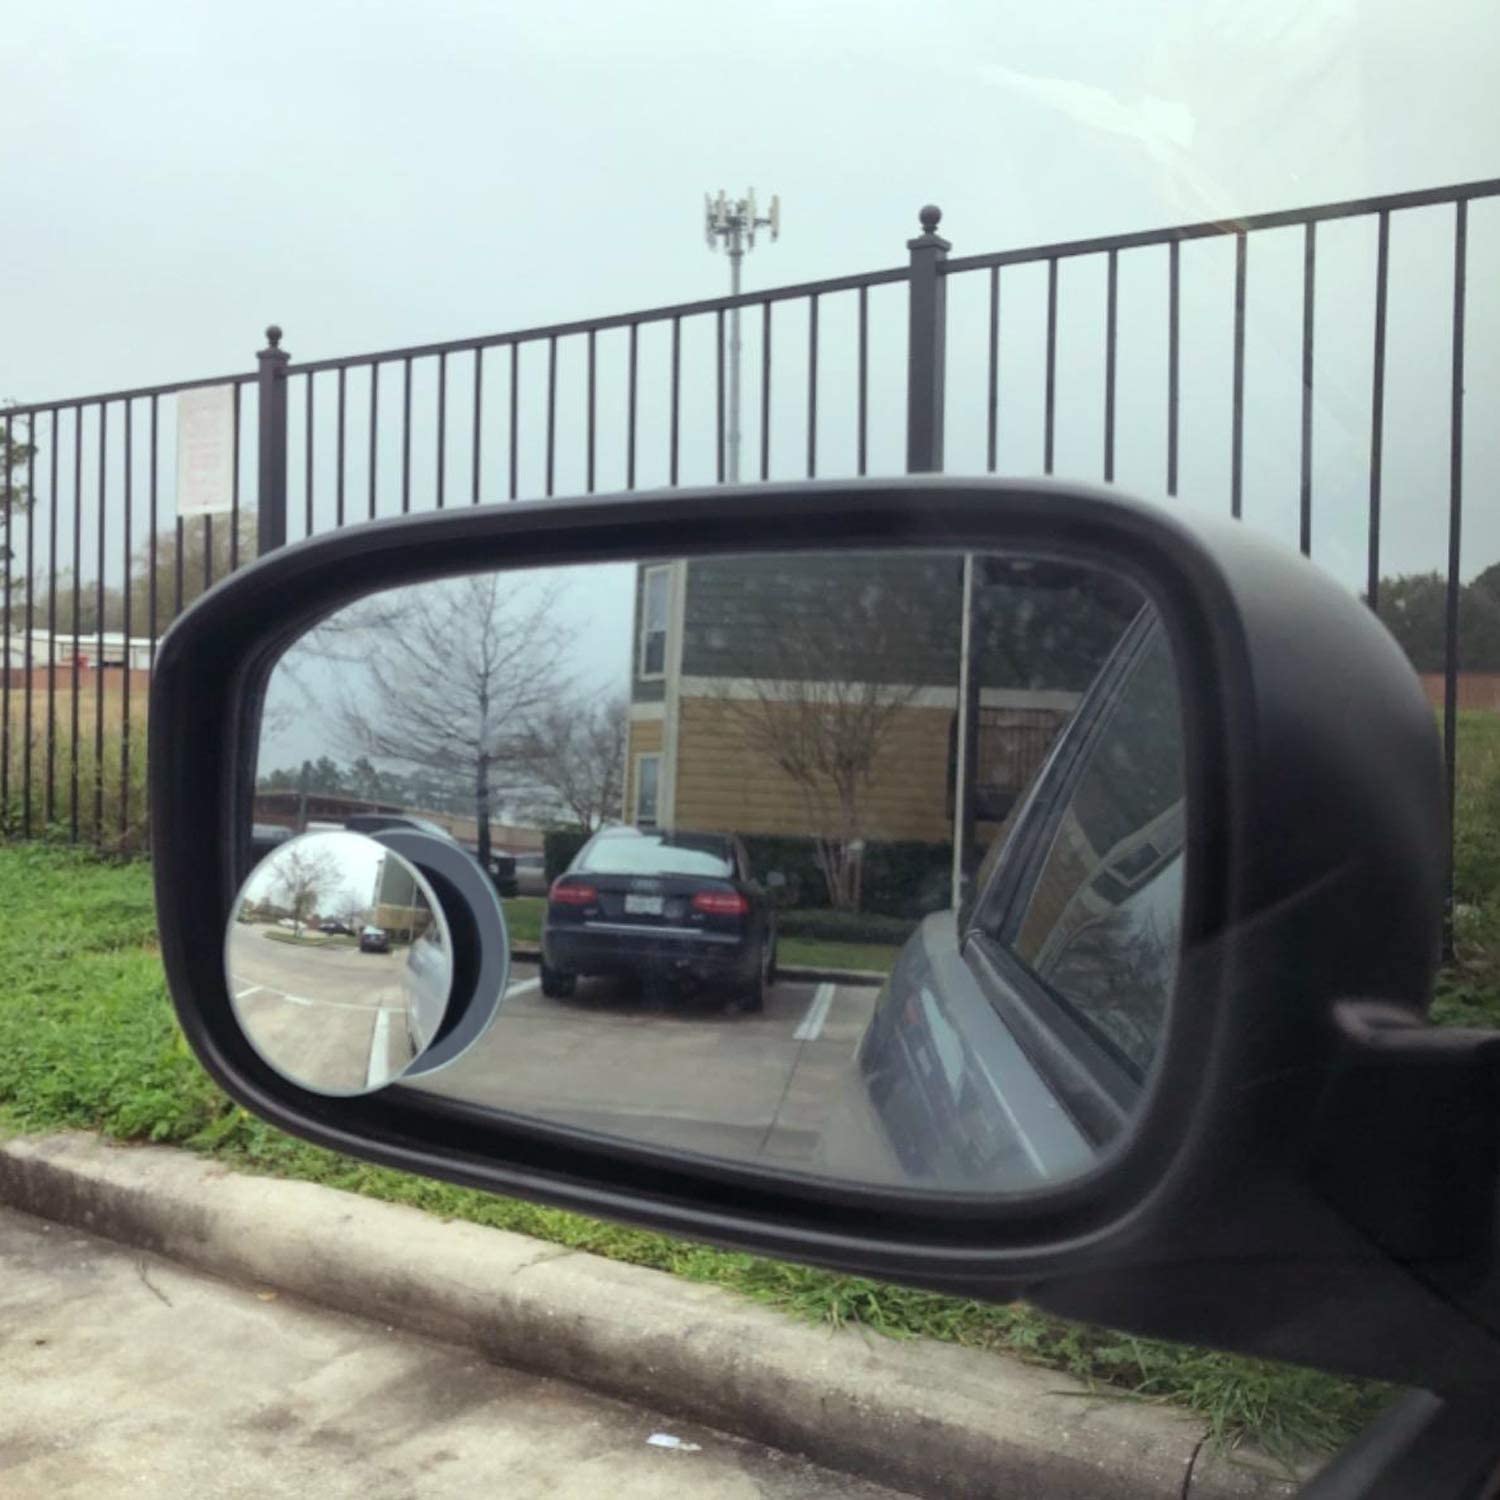 Do Blind Spot Mirrors Really Work, Can You Use Blind Spot Mirrors On Driving Test